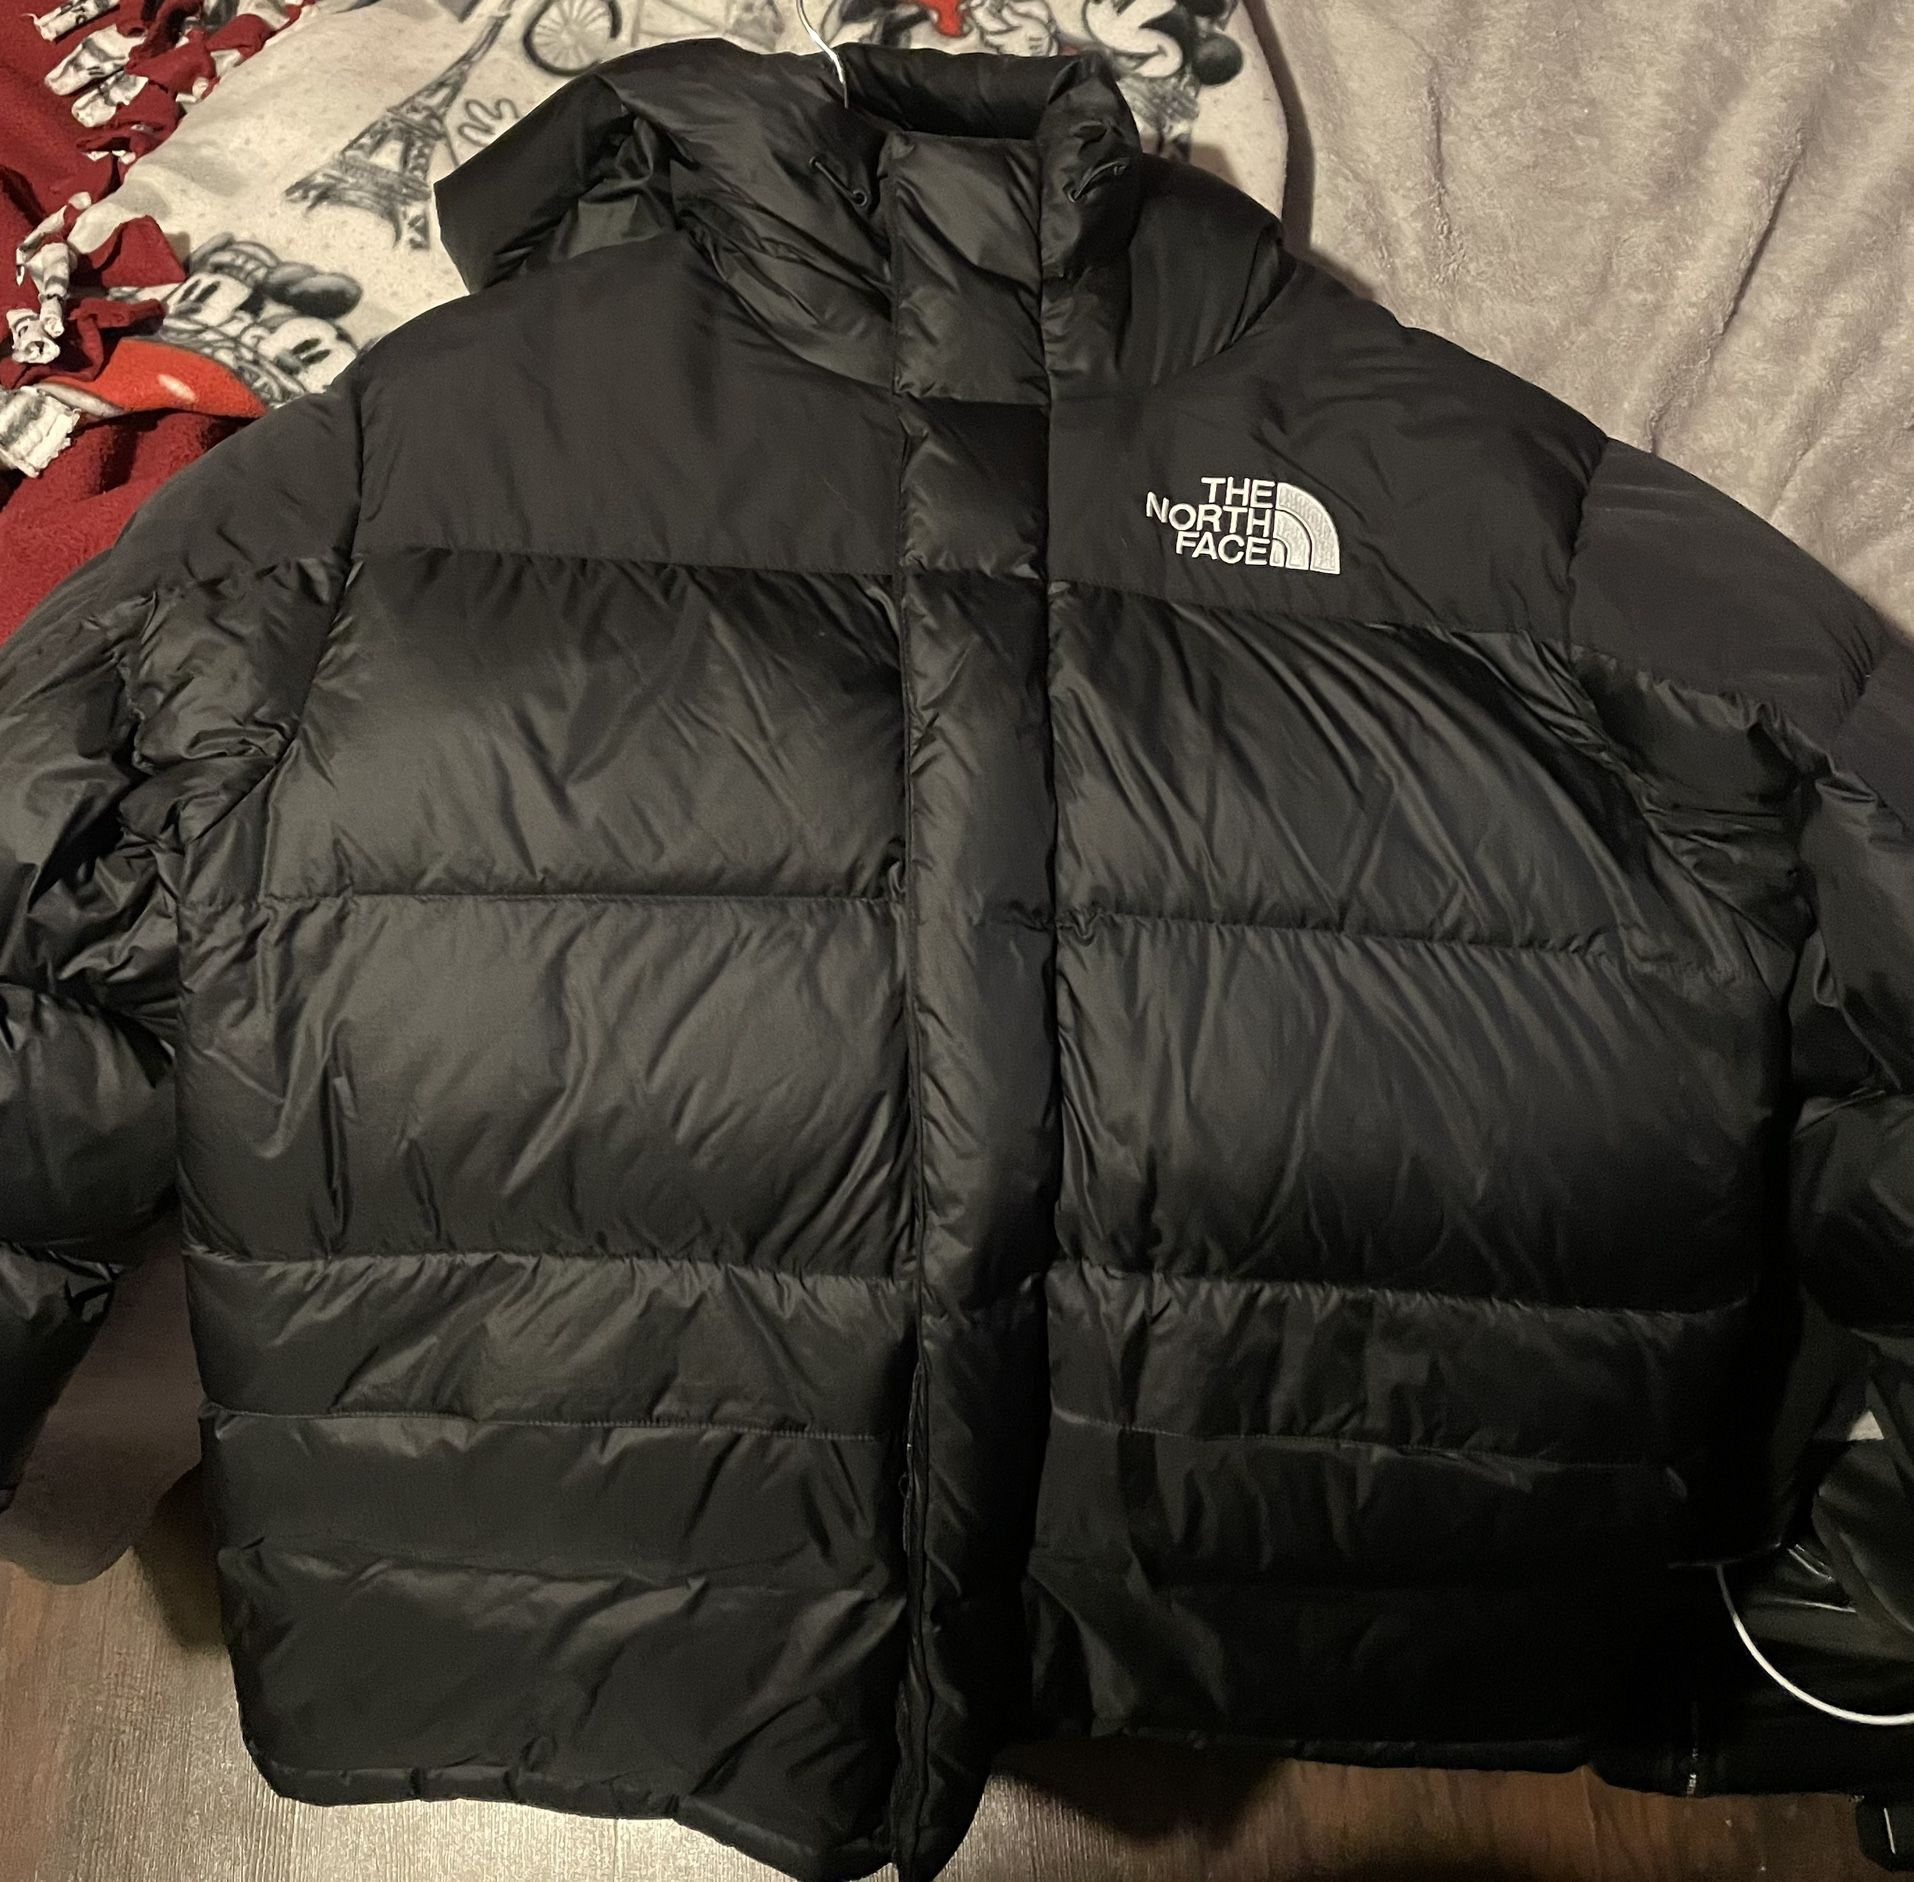 North Face Puffer Jacket $100